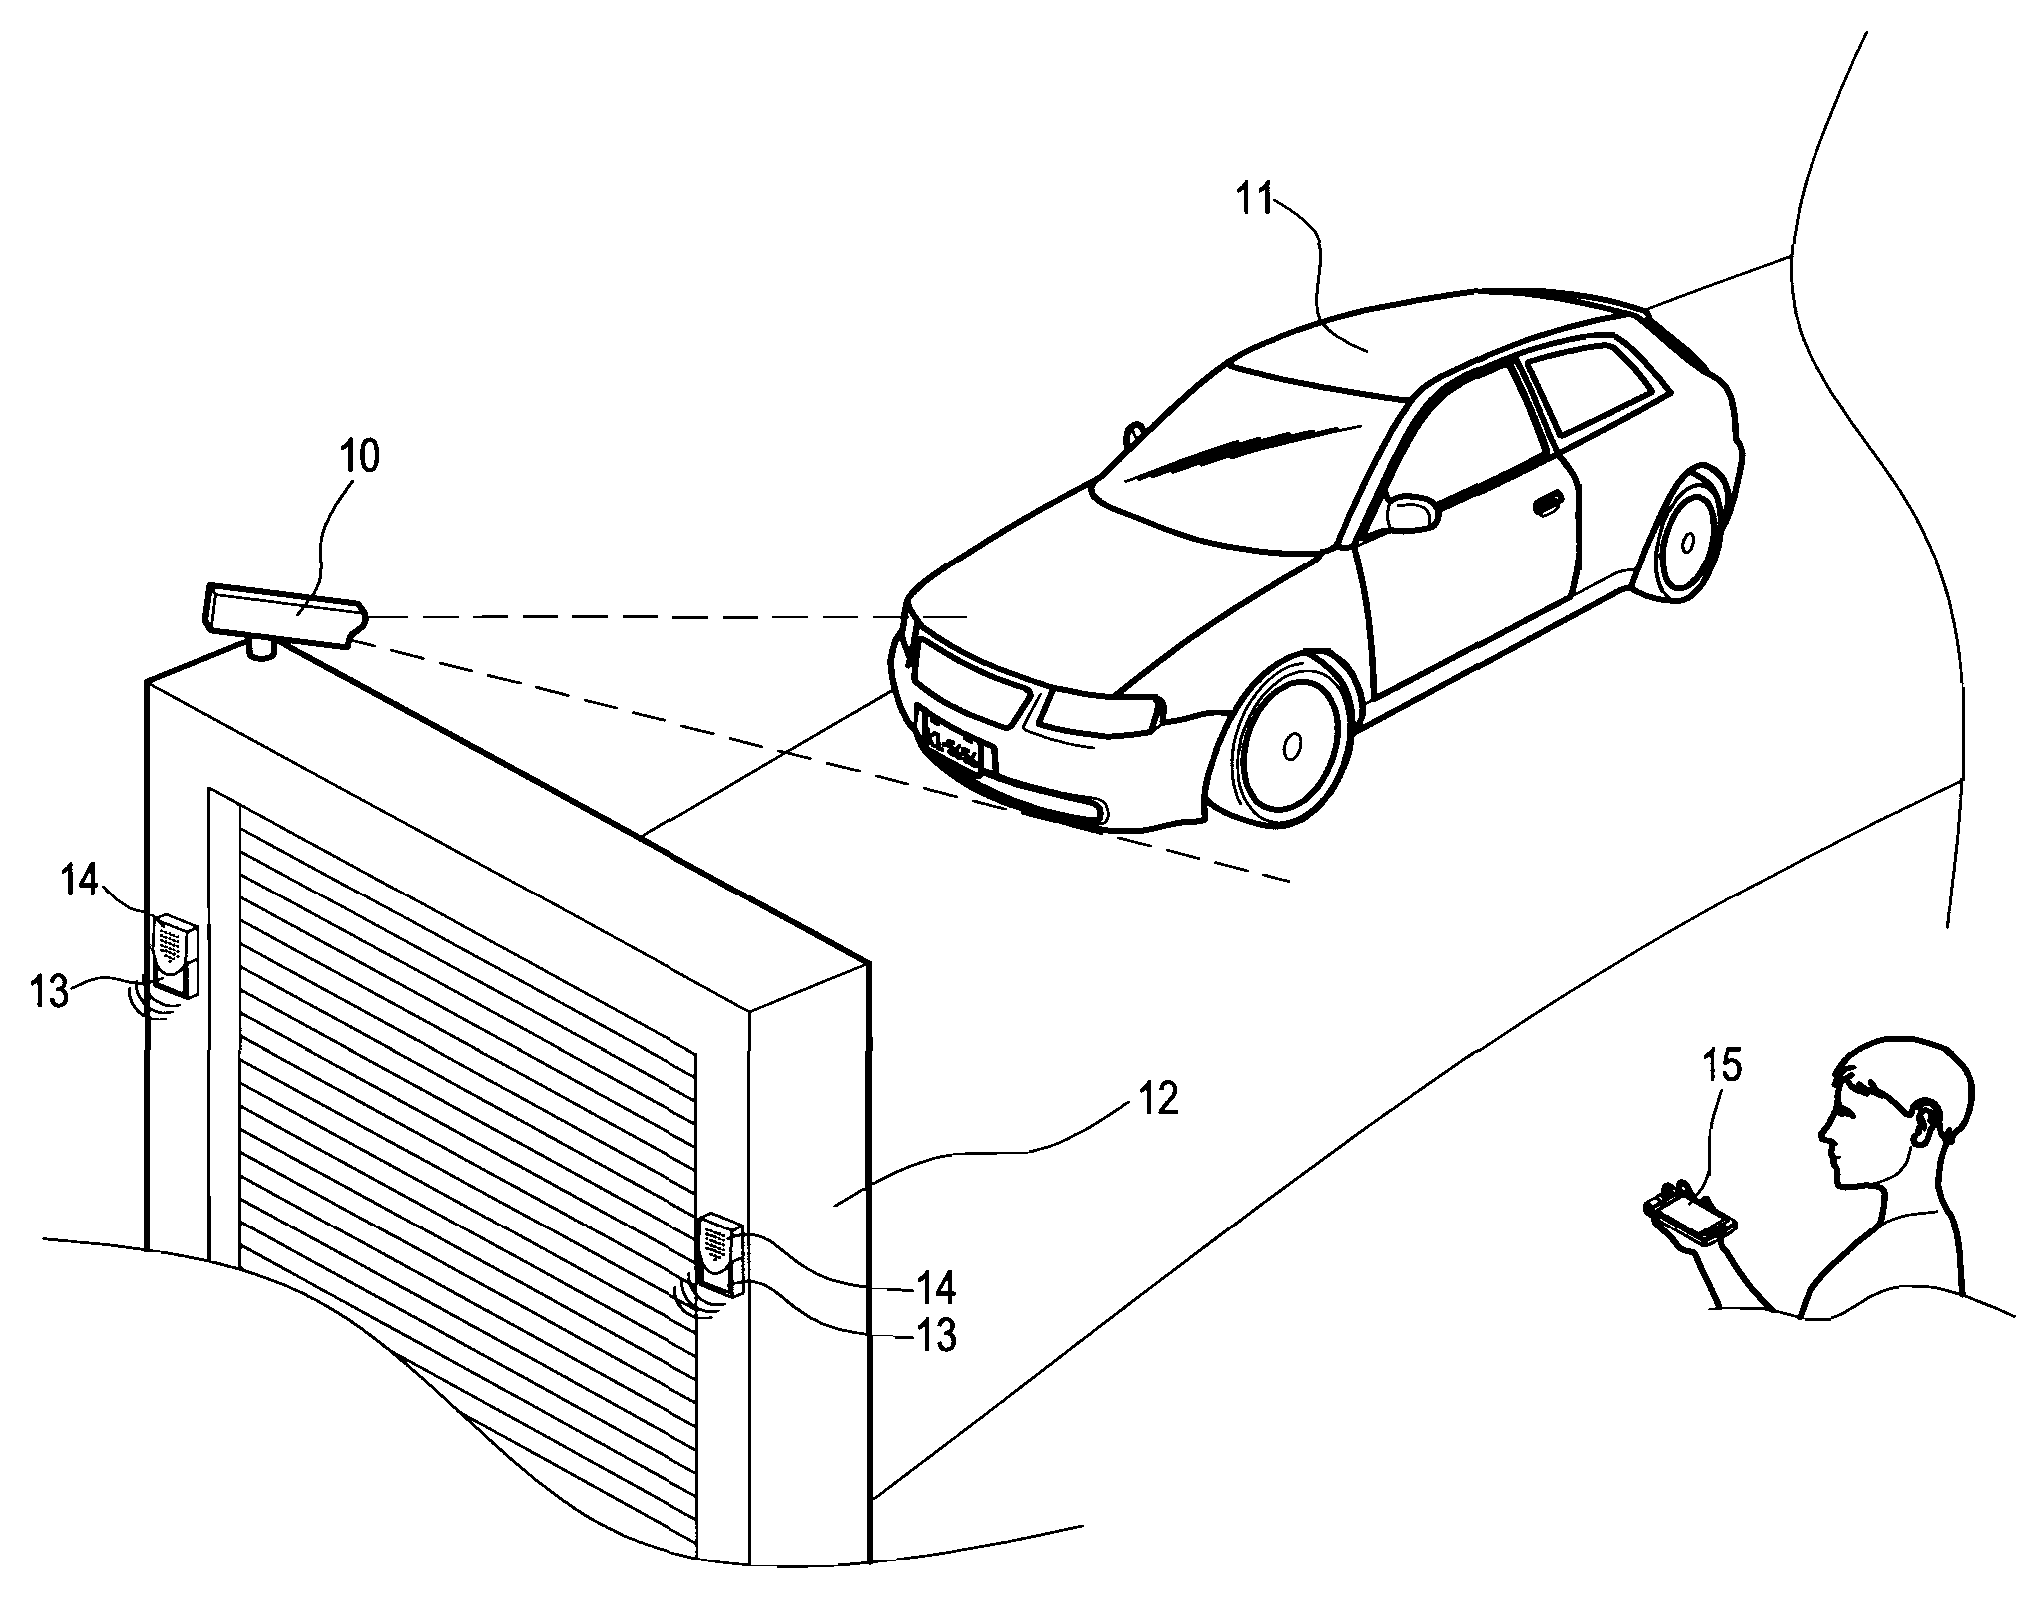 Camera with built-in license plate recognition function